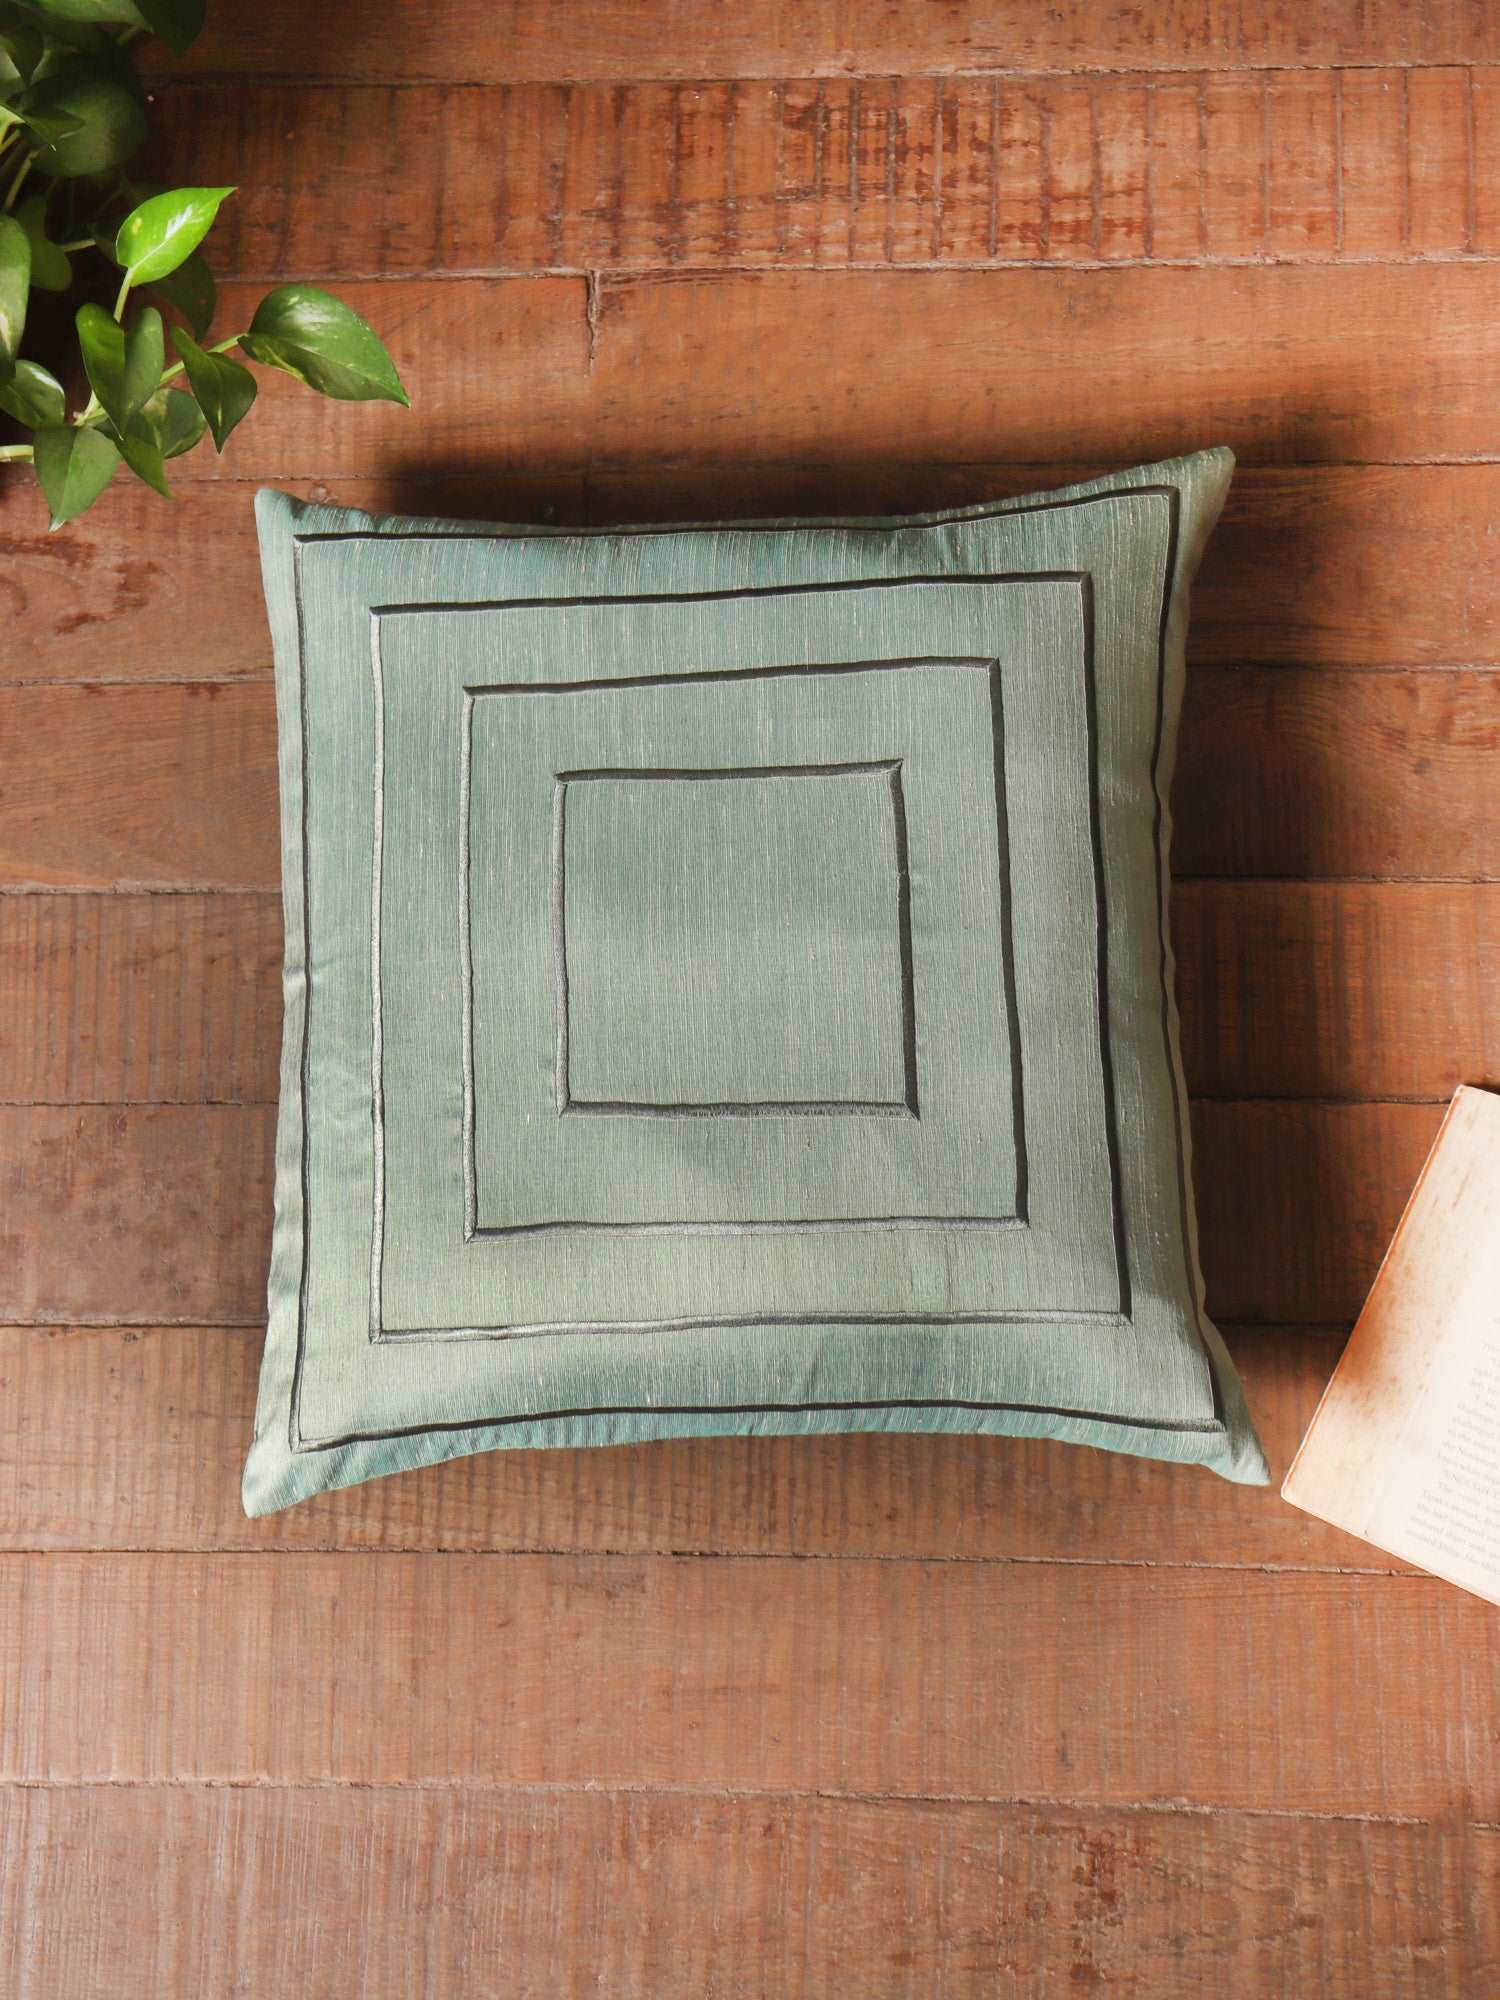 Cushion Cover Polyester Blend Concentric Embroidery Sage Green - 16" x 16"